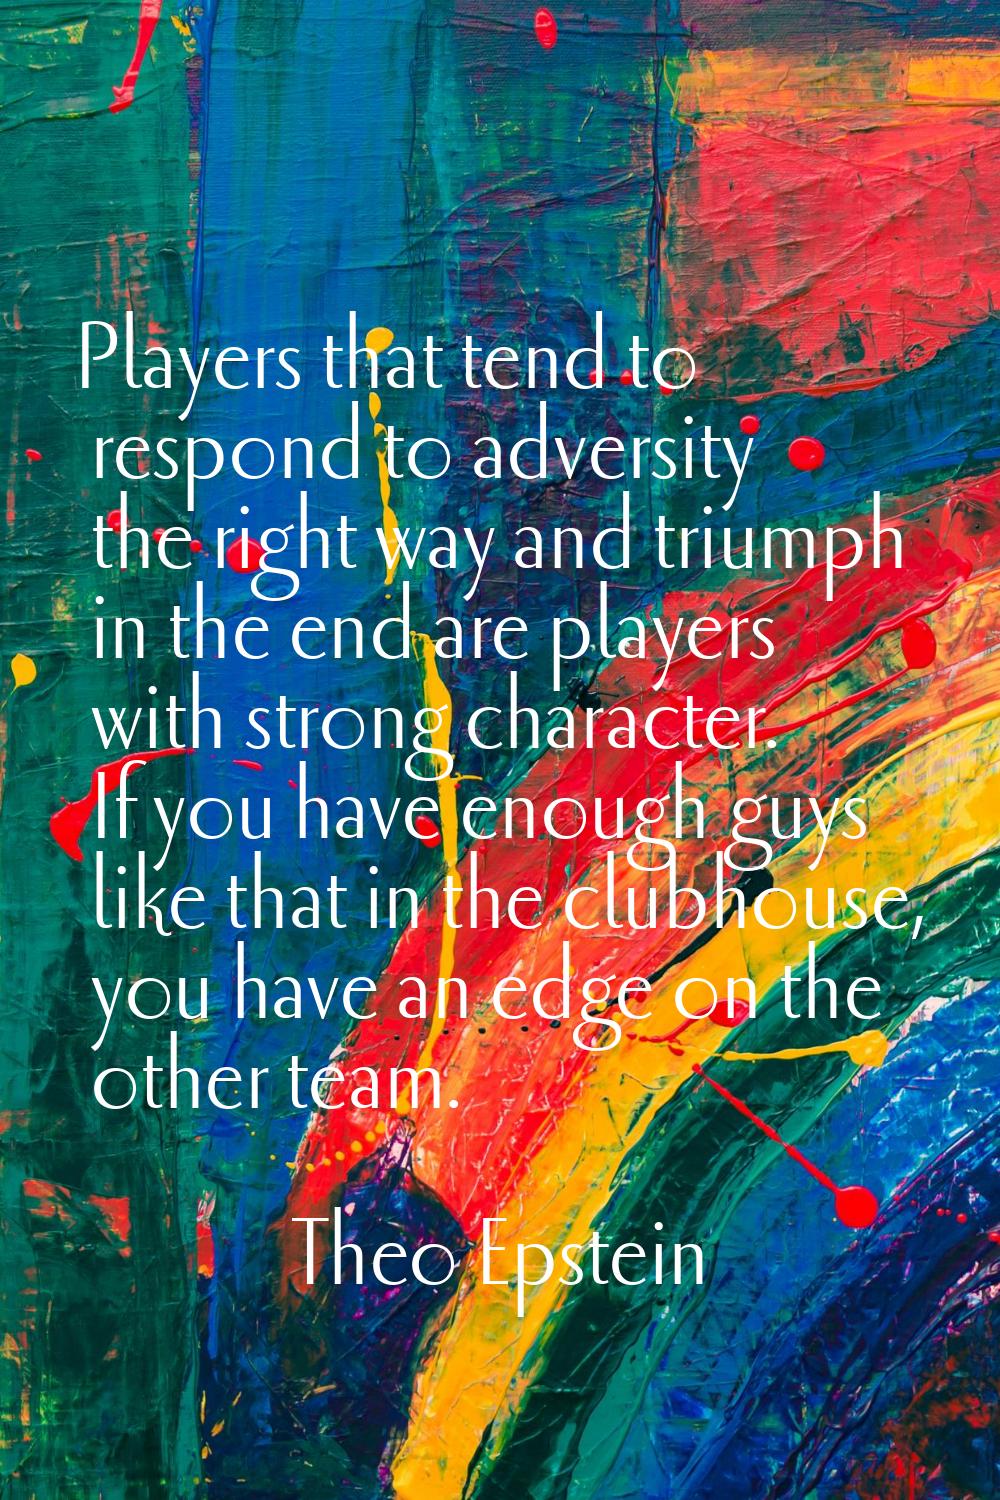 Players that tend to respond to adversity the right way and triumph in the end are players with str